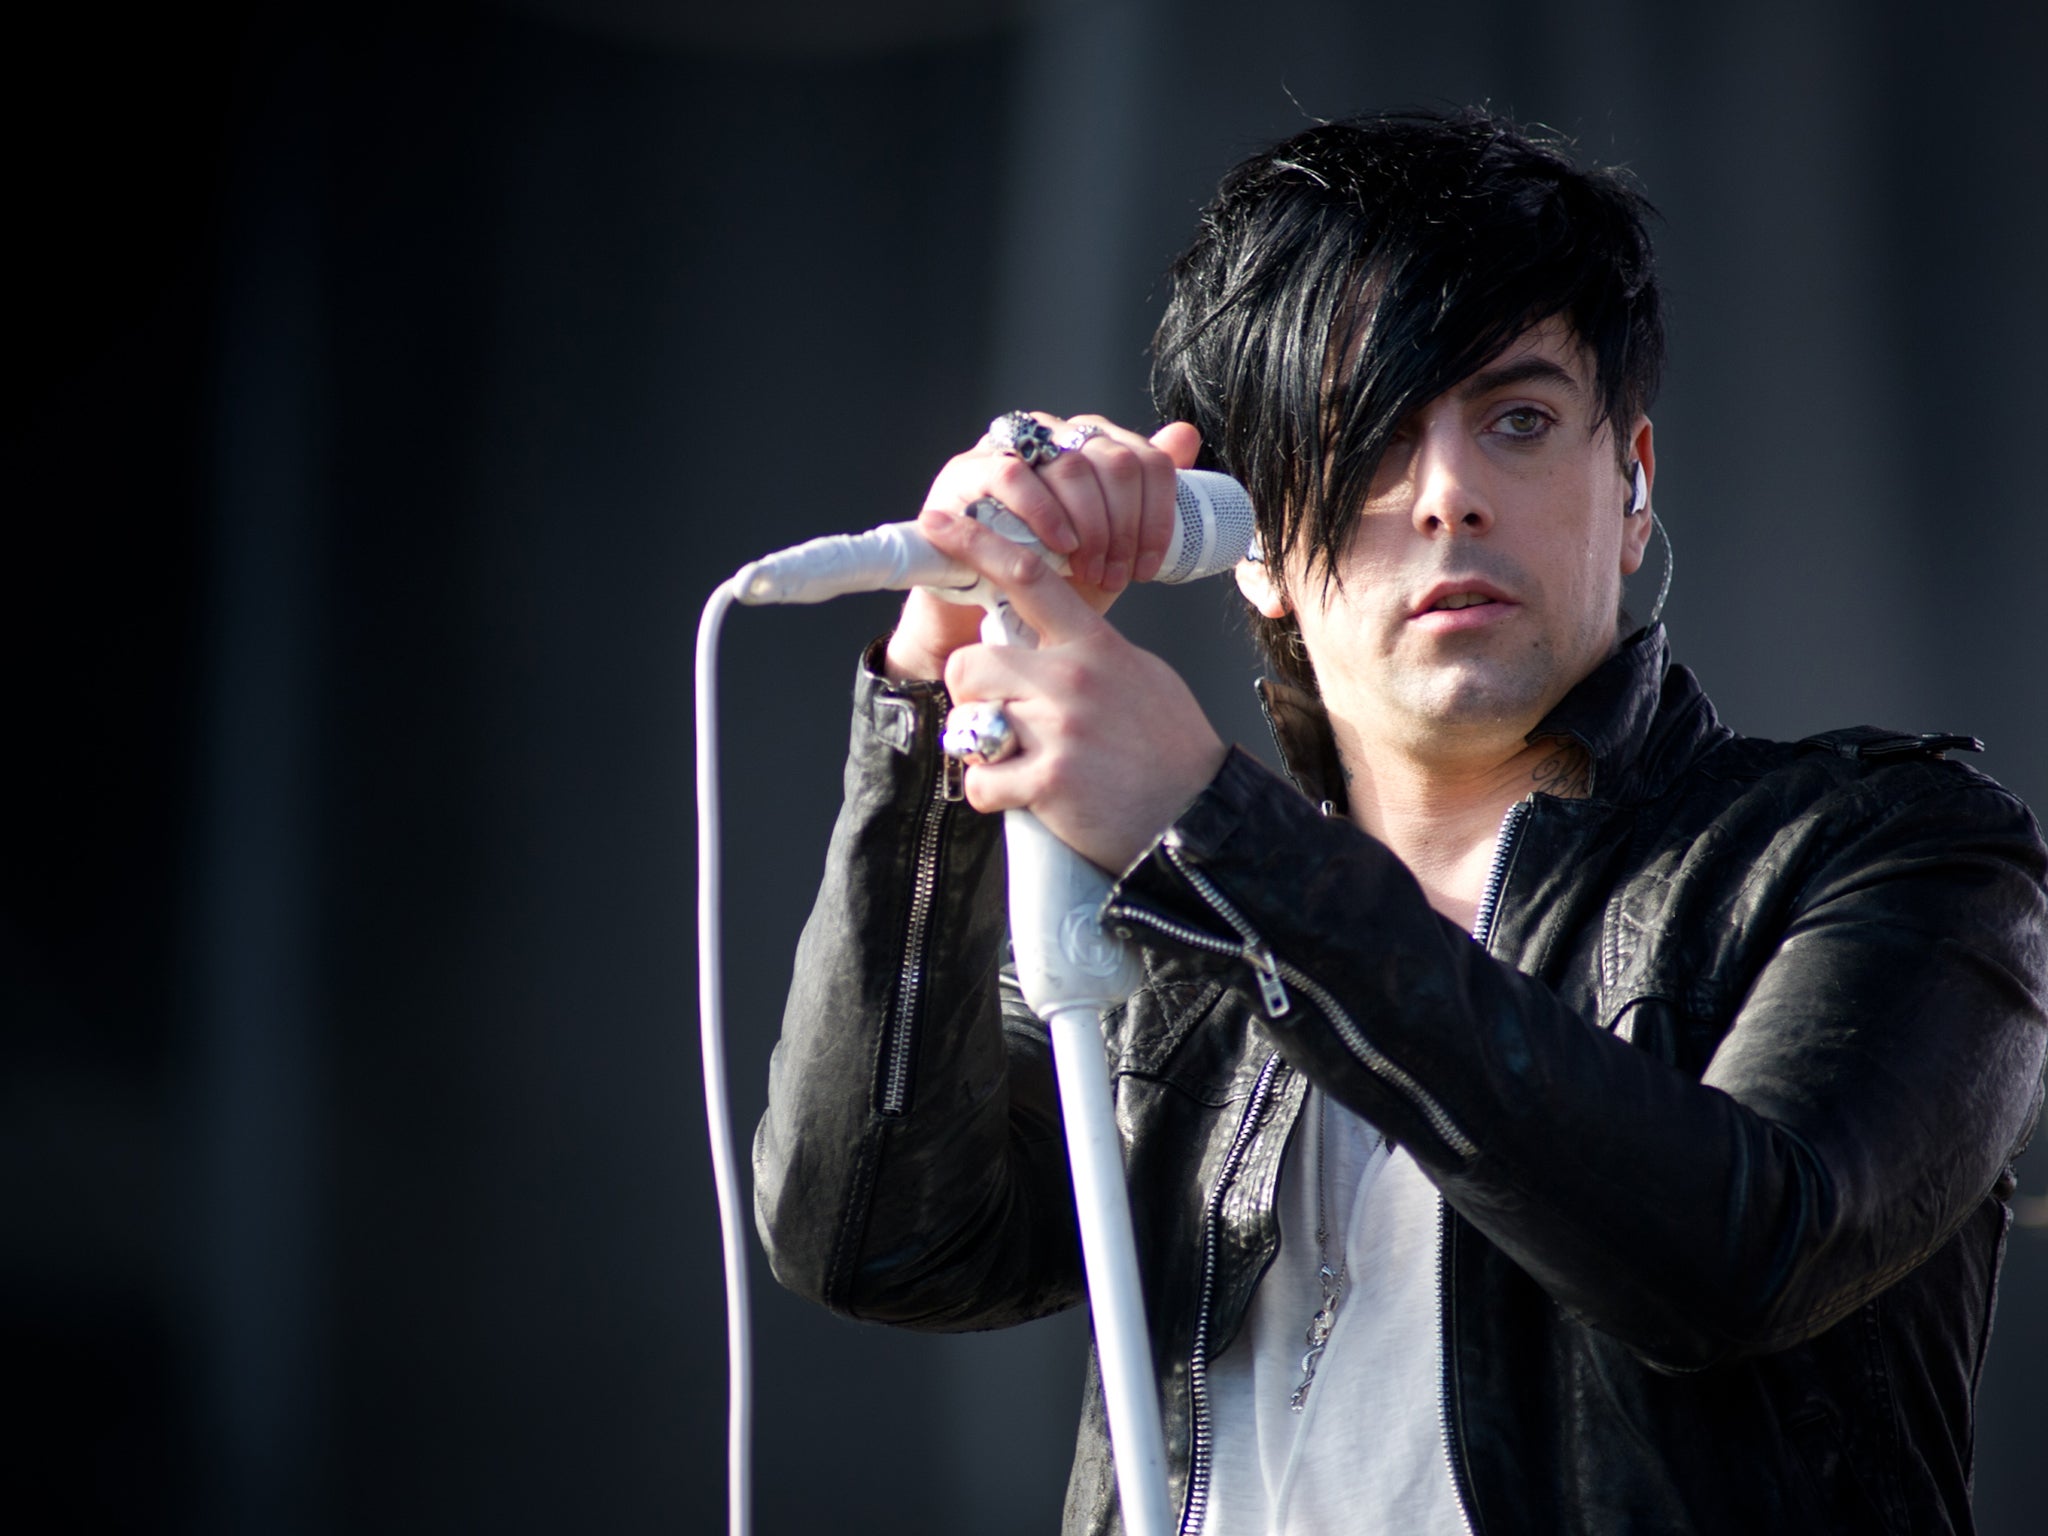 Police involved in the arrest of ‘Lostprophets’ vocalist Ian Watkins, in relation to an alleged plot to rape a baby, are under investigation over whether or not they acted quickly enough.